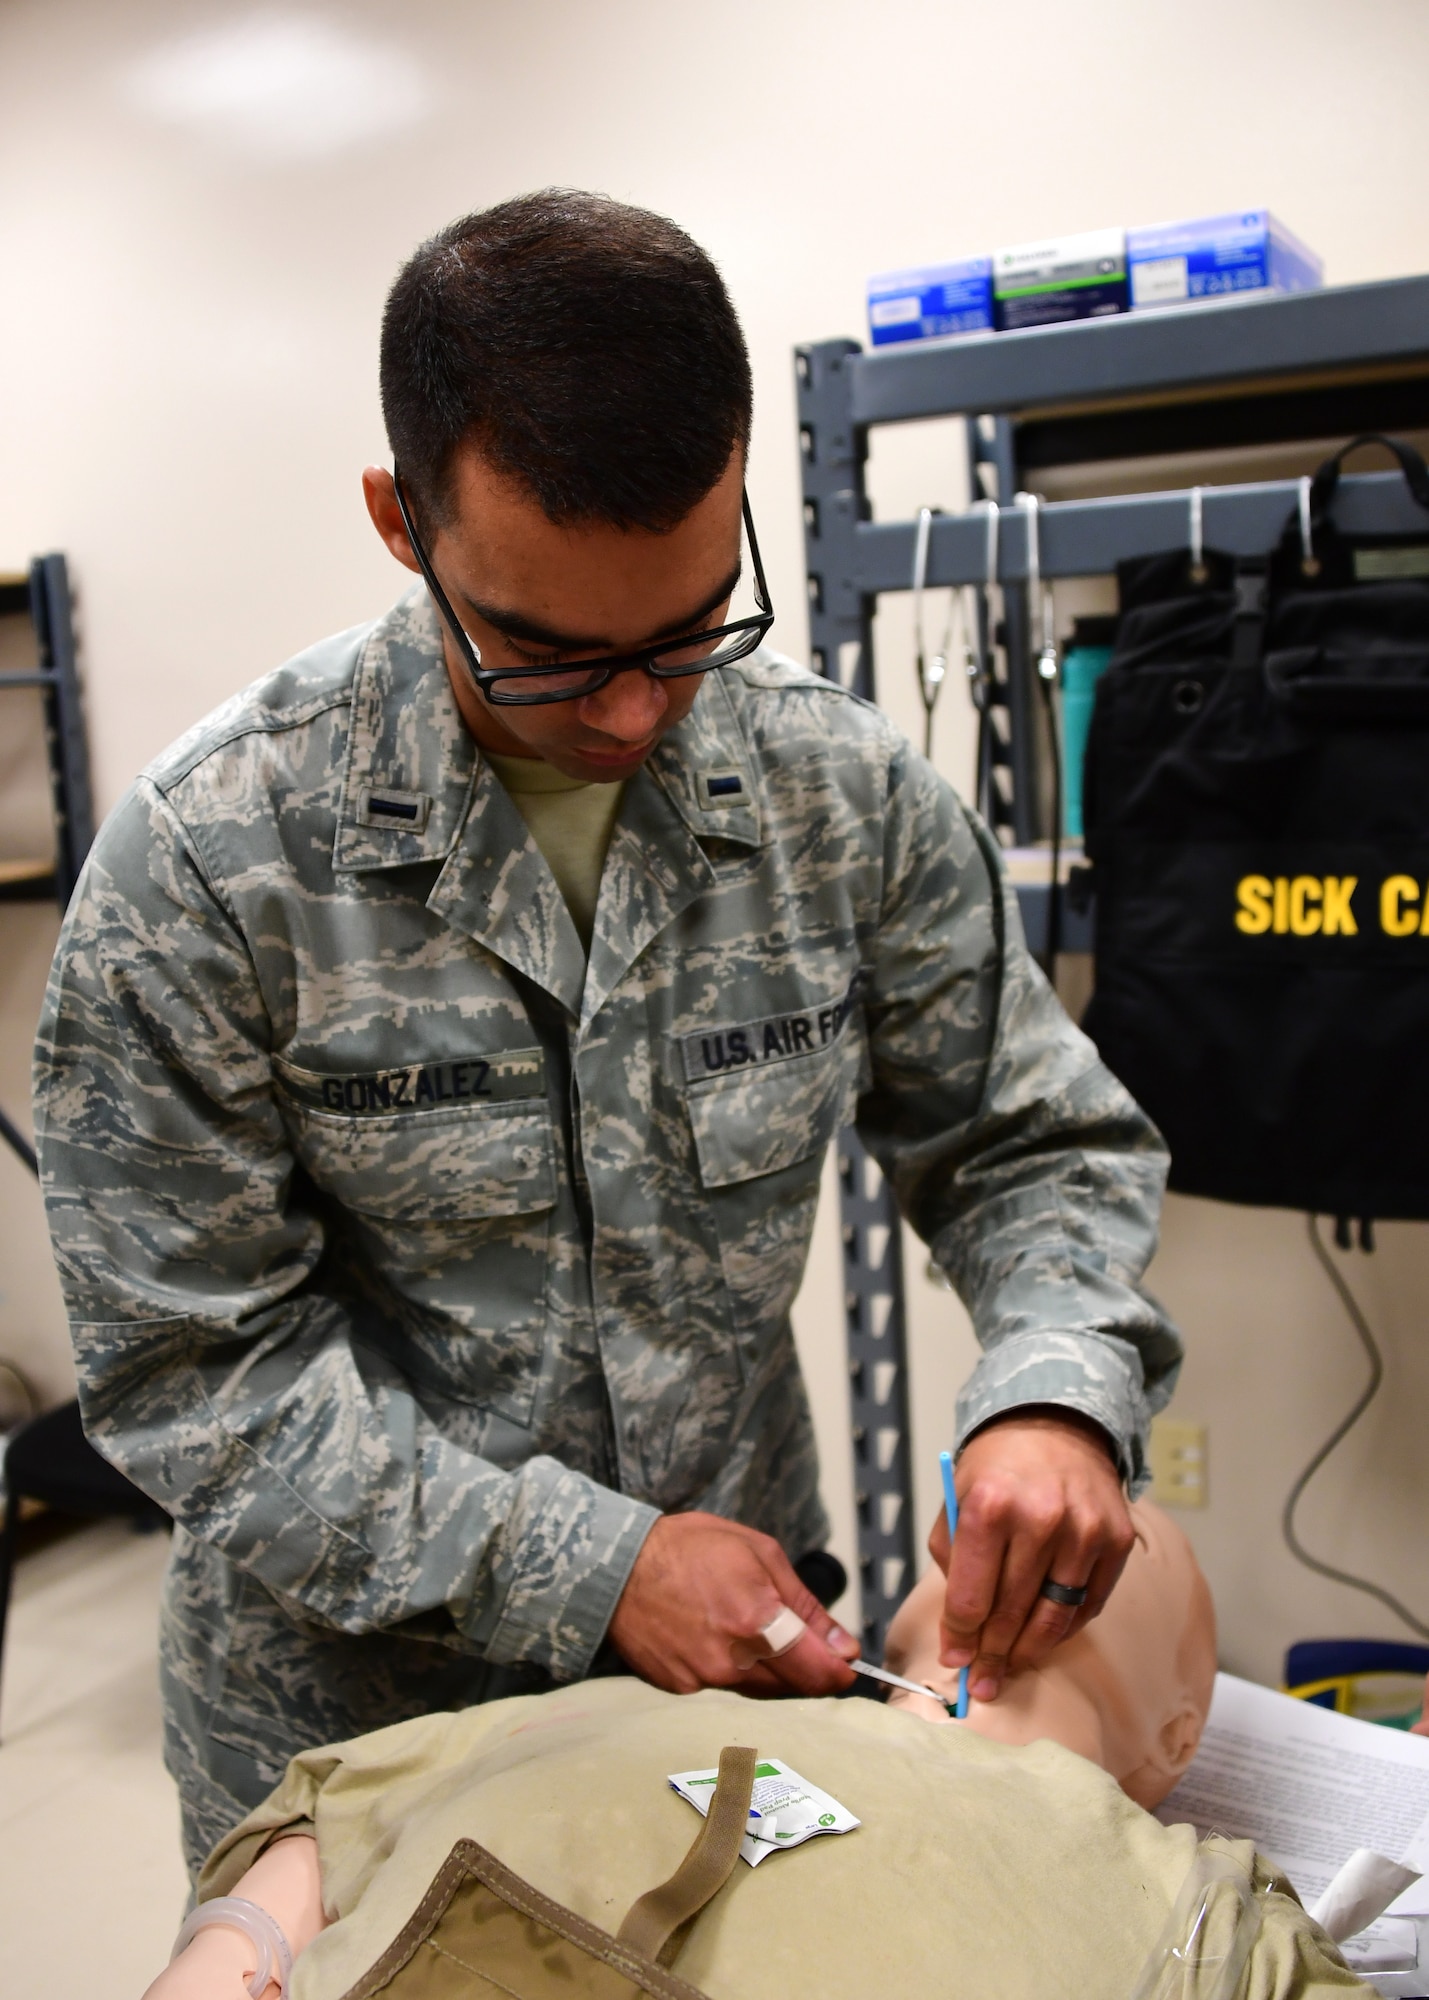 2nd Lt. Damian Gonzalez, flight nurse with the 911th Aeromedical Evacuation Squadron, practices opening an airway through the trachea at Fort Indiantown Gap, Pennsylvania June 19, 2019. This was one of the stations the members of the 911th Airlift Wing had to train at in preparation for their simulation with mechanical mannequins. (U.S. Air Force photo by Senior Airman Grace Thomson)